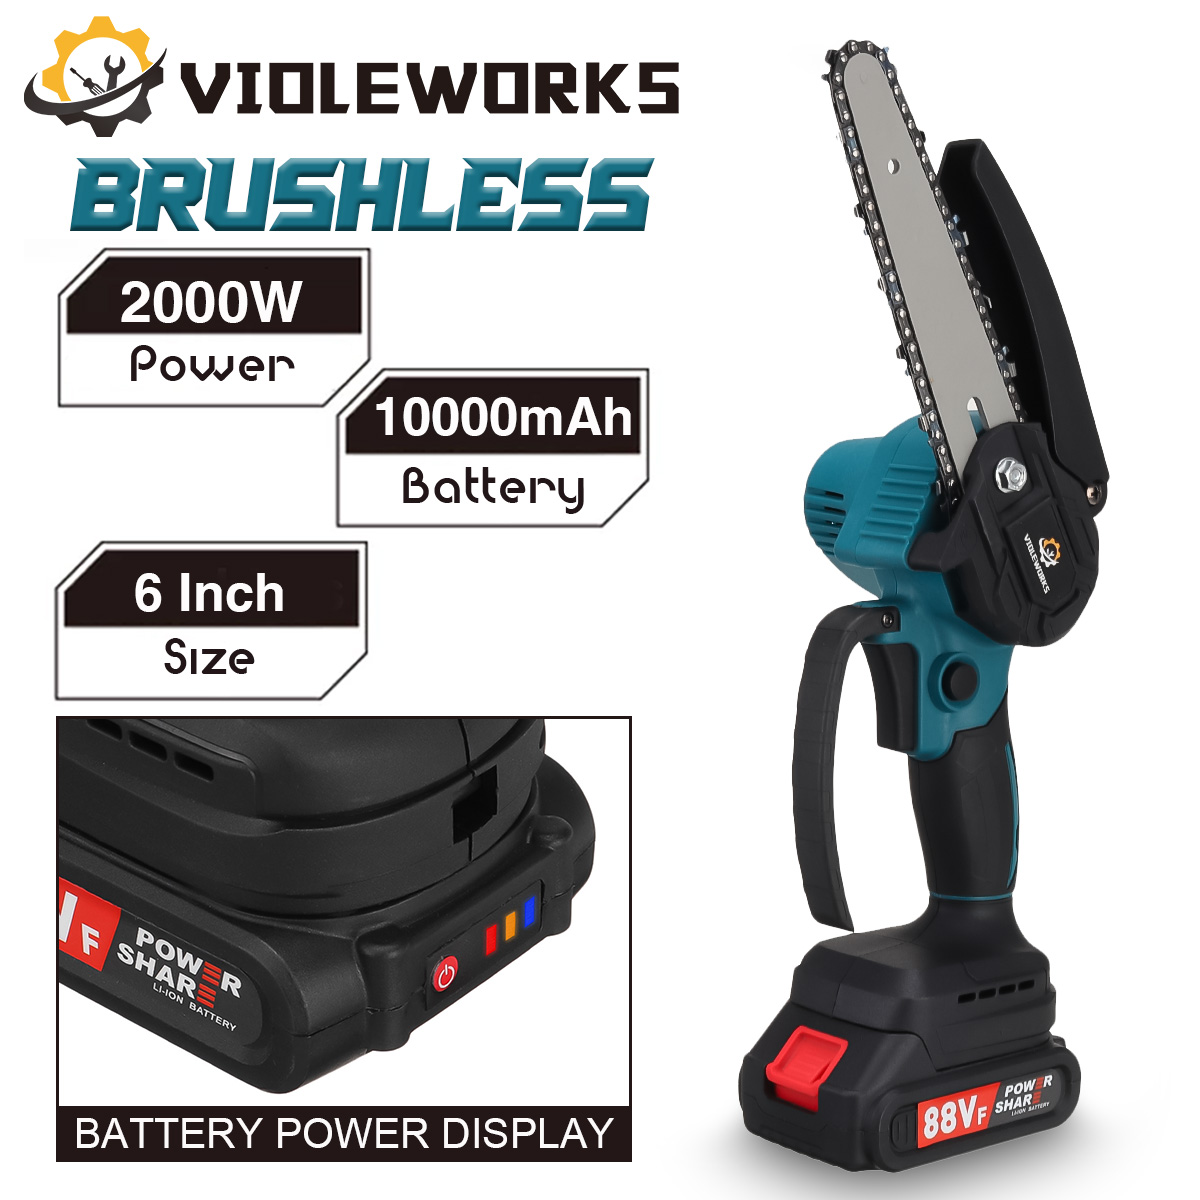 VIOLEWORKS-6-Inch-2000W-88VF-Brushless-Electric-Saw-Chainsaw-Pruning-Saws-Woodworking-Cutting-Tool-W-1904964-3